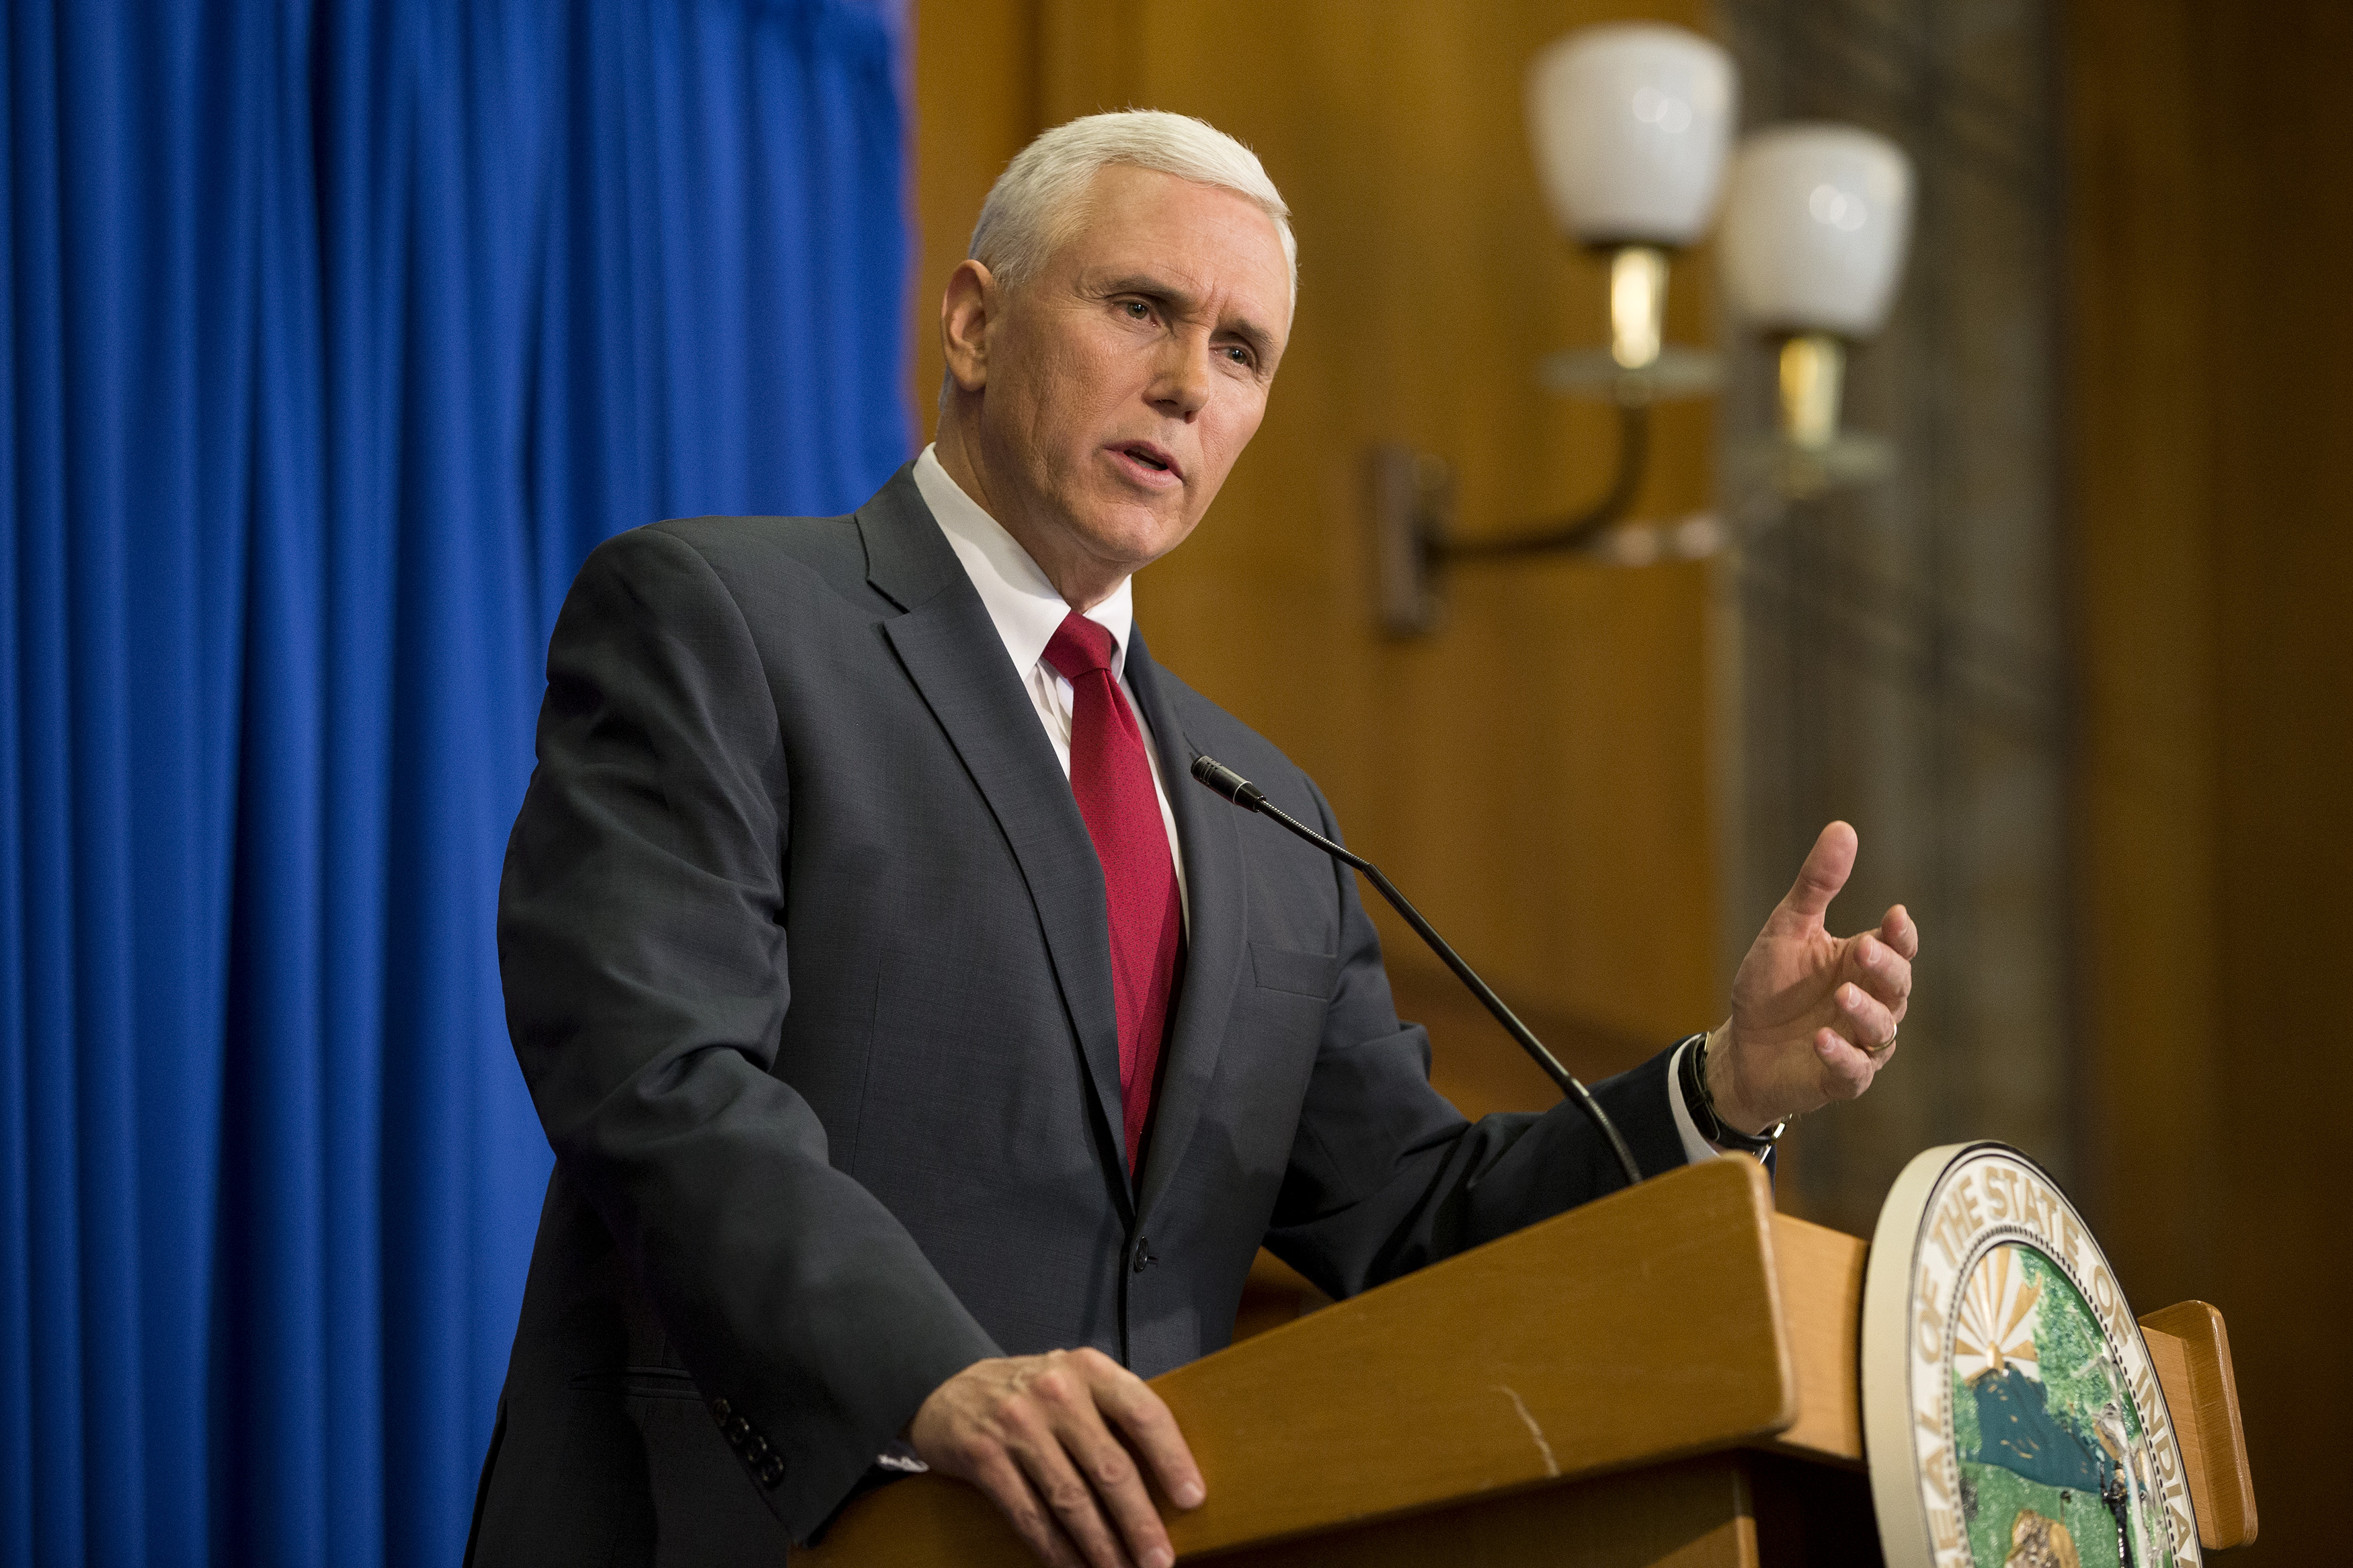 INDIANAPOLIS, IN - MARCH 31: Indiana Gov. Mike Pence speaks during a press conference March 31, 2015 at the Indiana State Library in Indianapolis, Indiana. Pence spoke about the state's controversial Religious Freedom Restoration Act which has been condemned by business leaders and Democrats. (Photo by Aaron P. Bernstein/Getty Images)